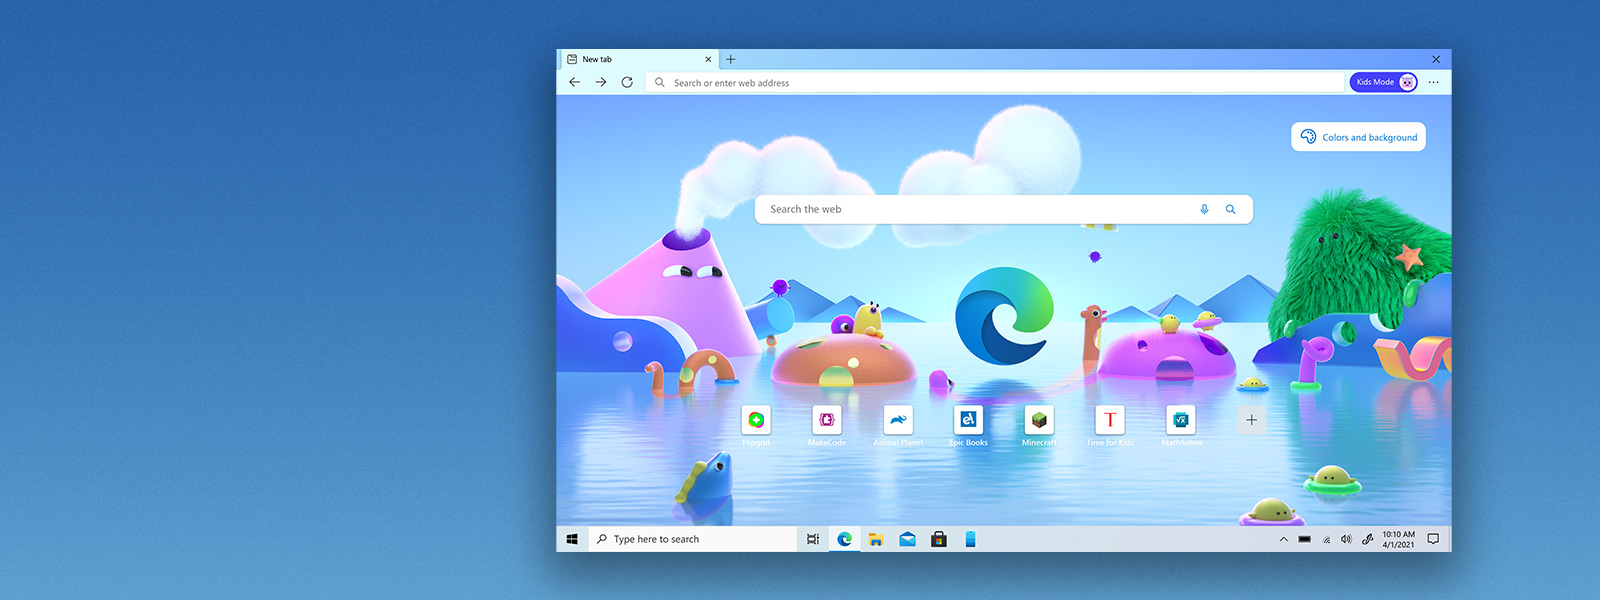 Microsoft Edge browser homescreen featuring various cartoon characters for Kids Mode